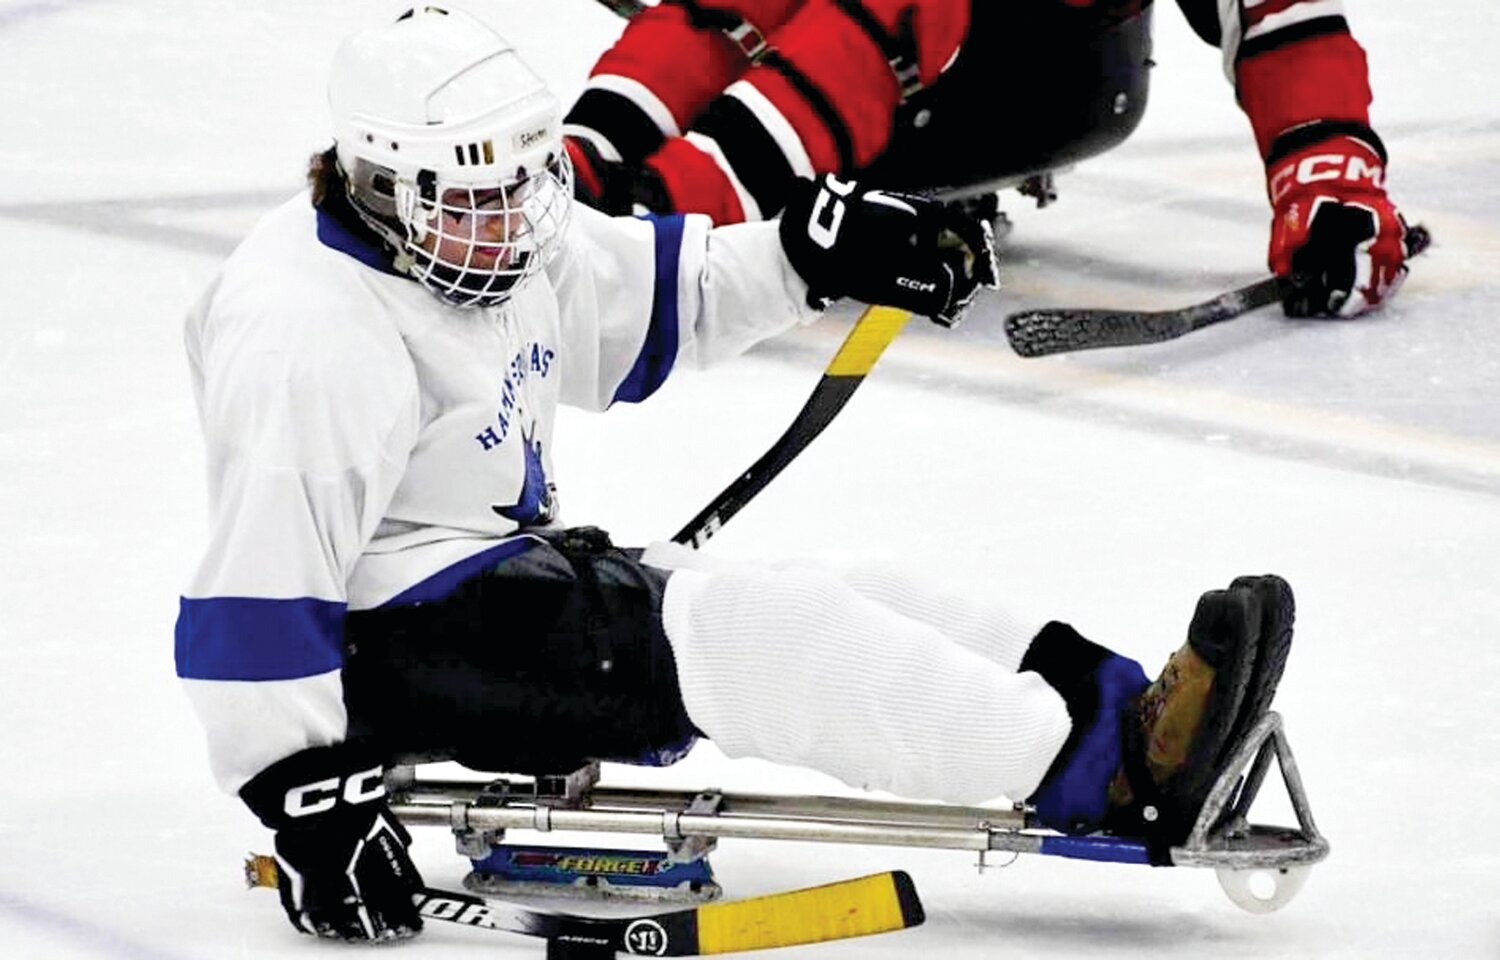 Stephen Bleacher from Voorhees, N.J. catches the puck with his right-hand stick during a sled hockey game.